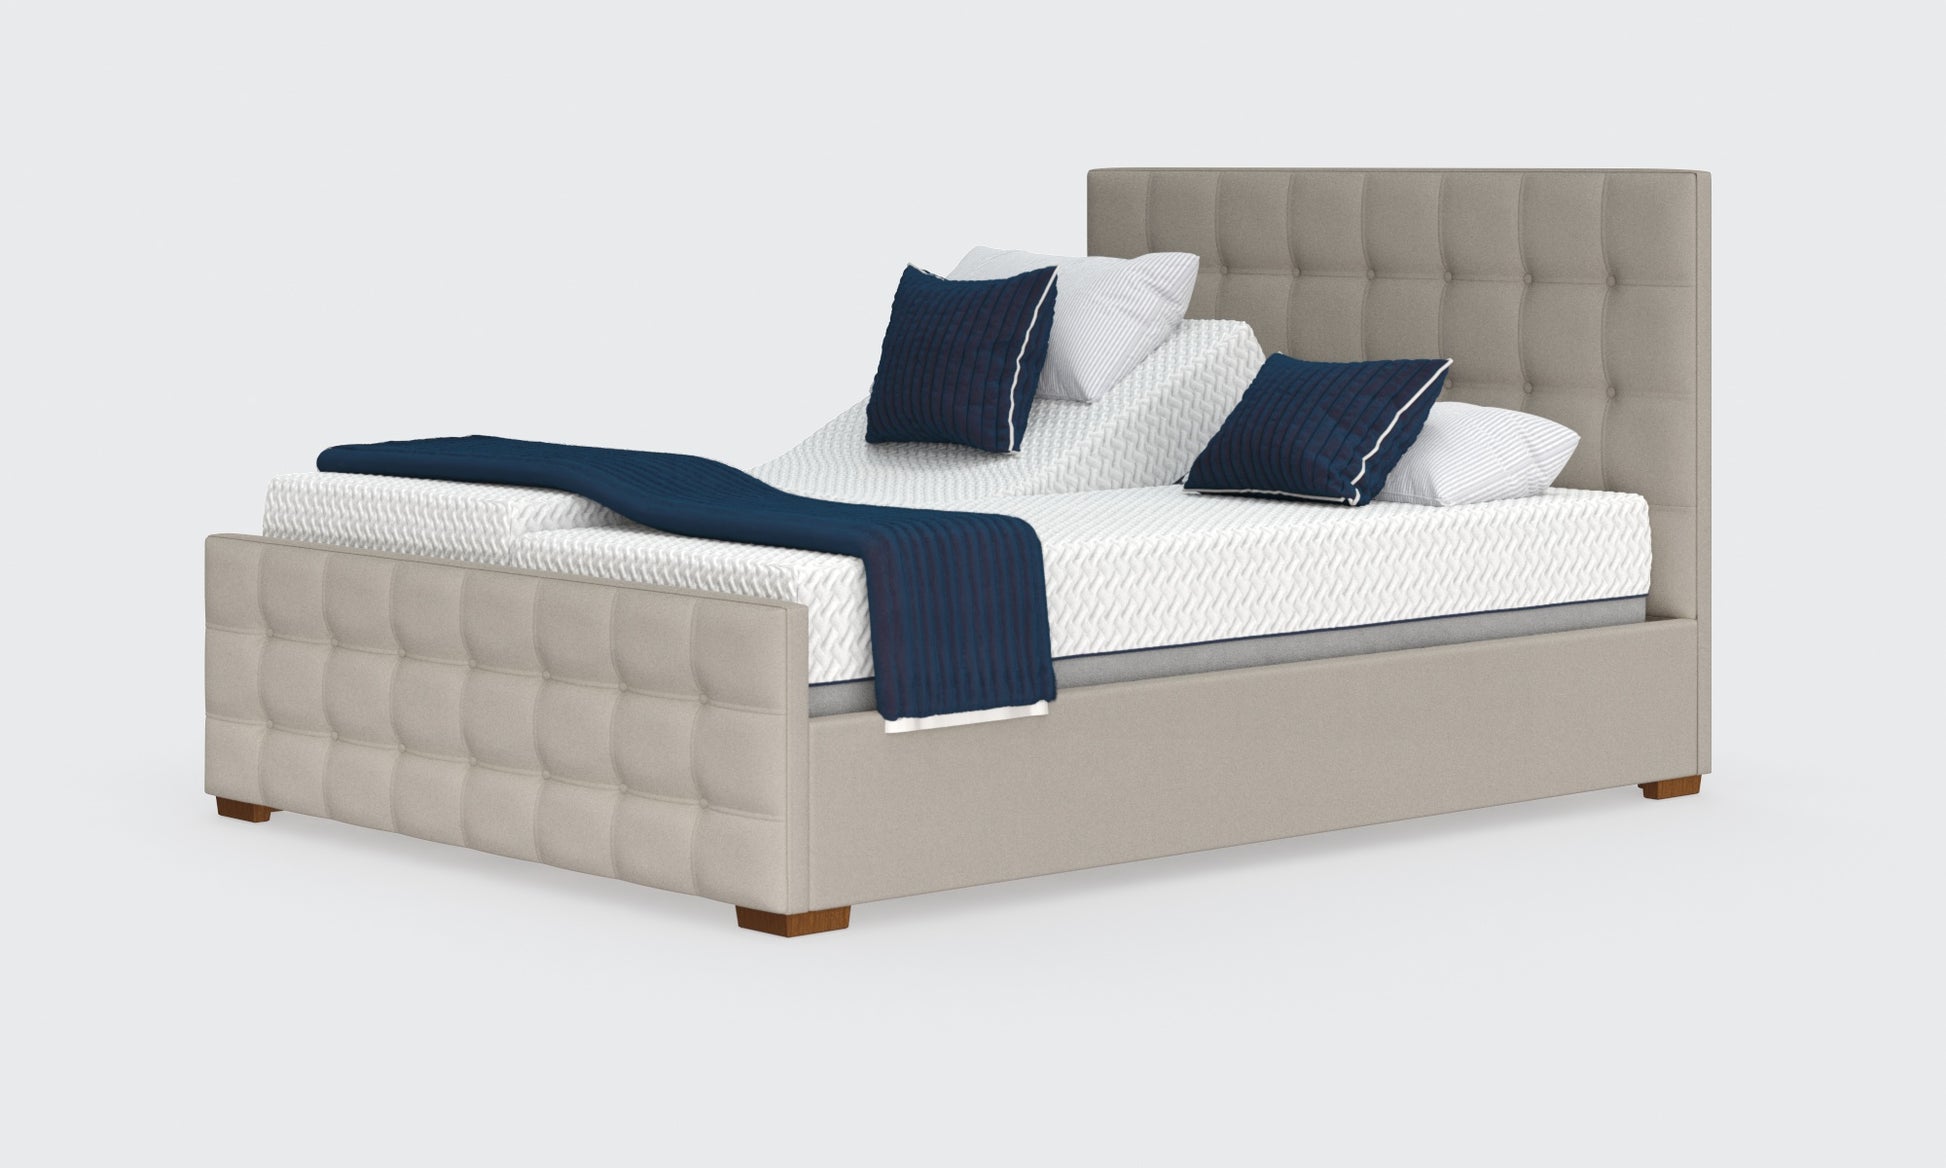 Edel 5ft bed and mattress in the linen material with the emerald headboard